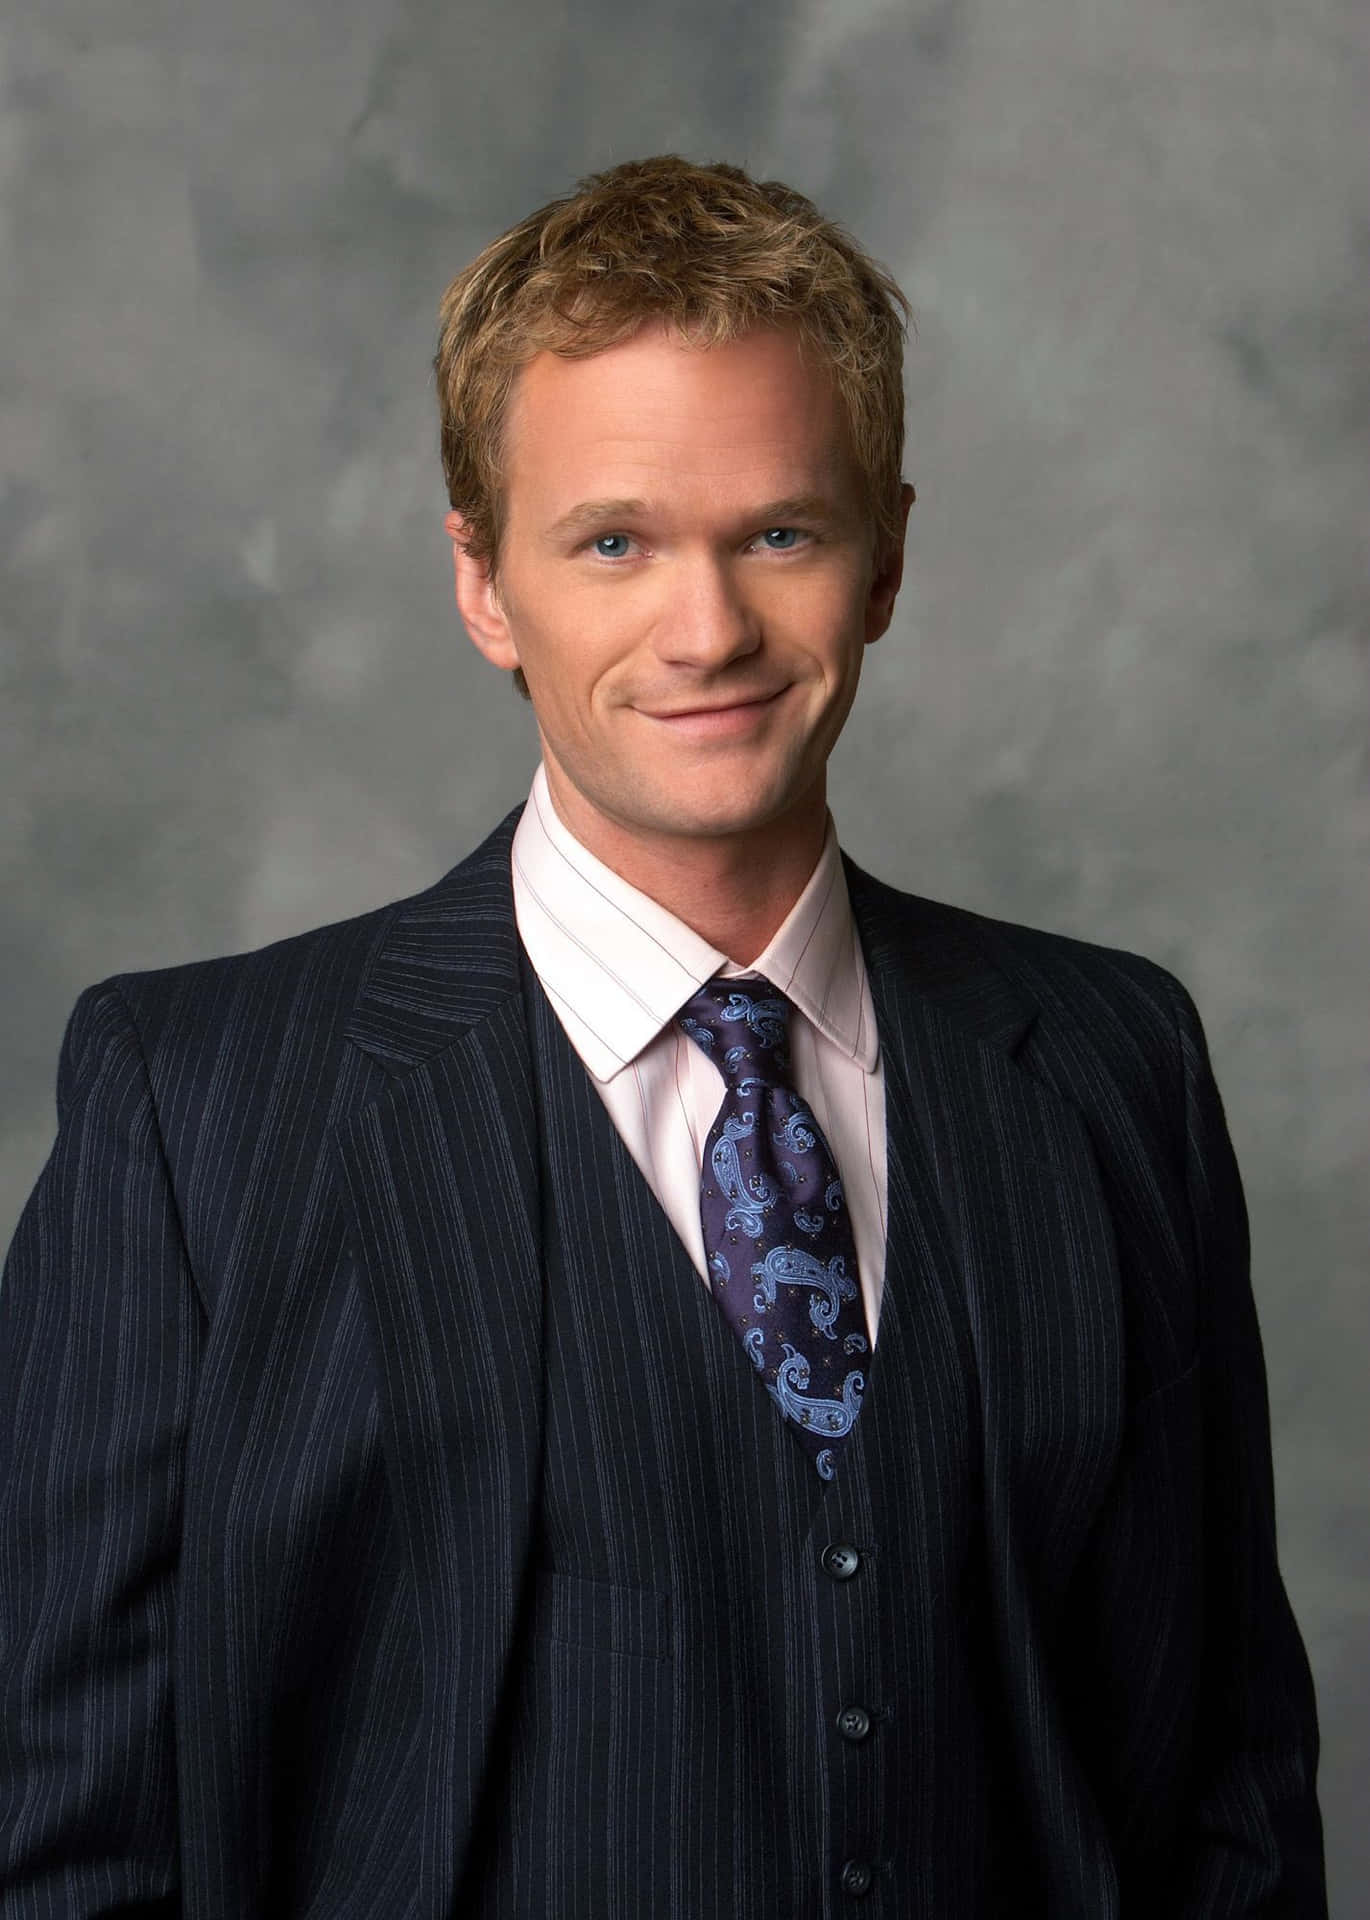 Neil Patrick Harris in an iconic pose Wallpaper